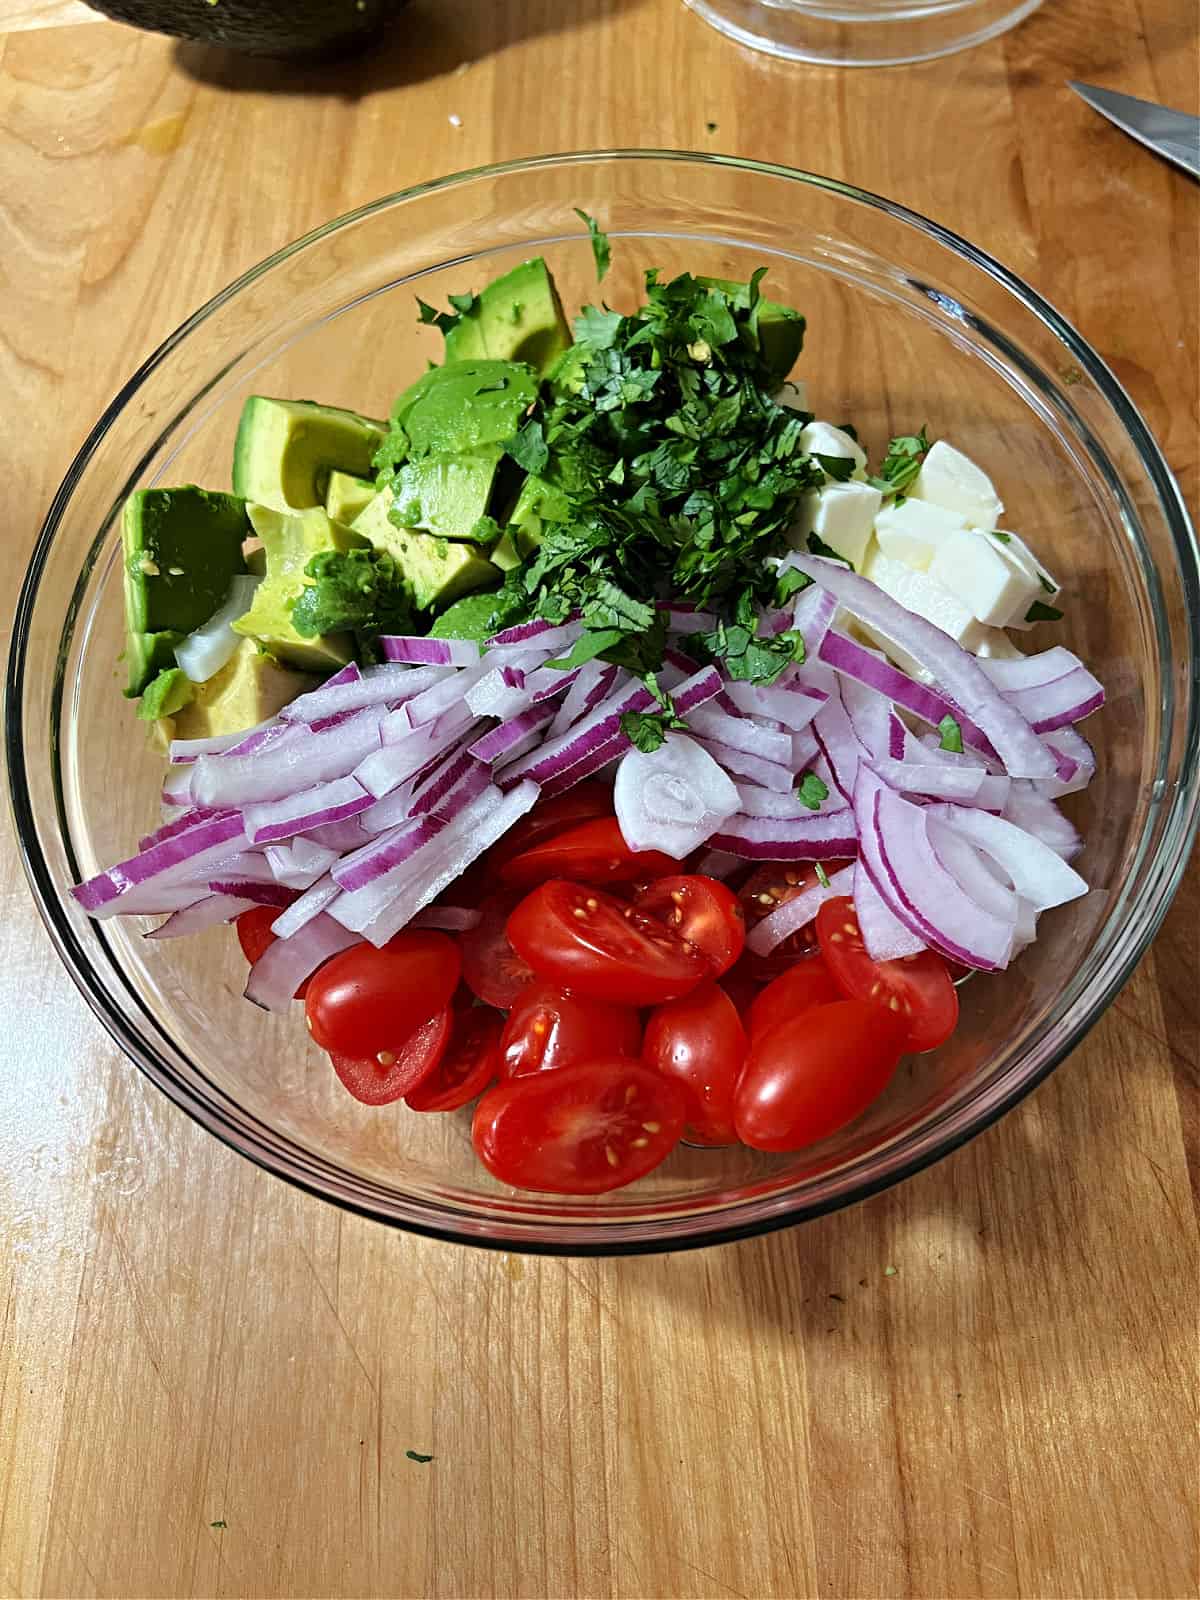 Undressed salad ingredients in the mixing bowl.